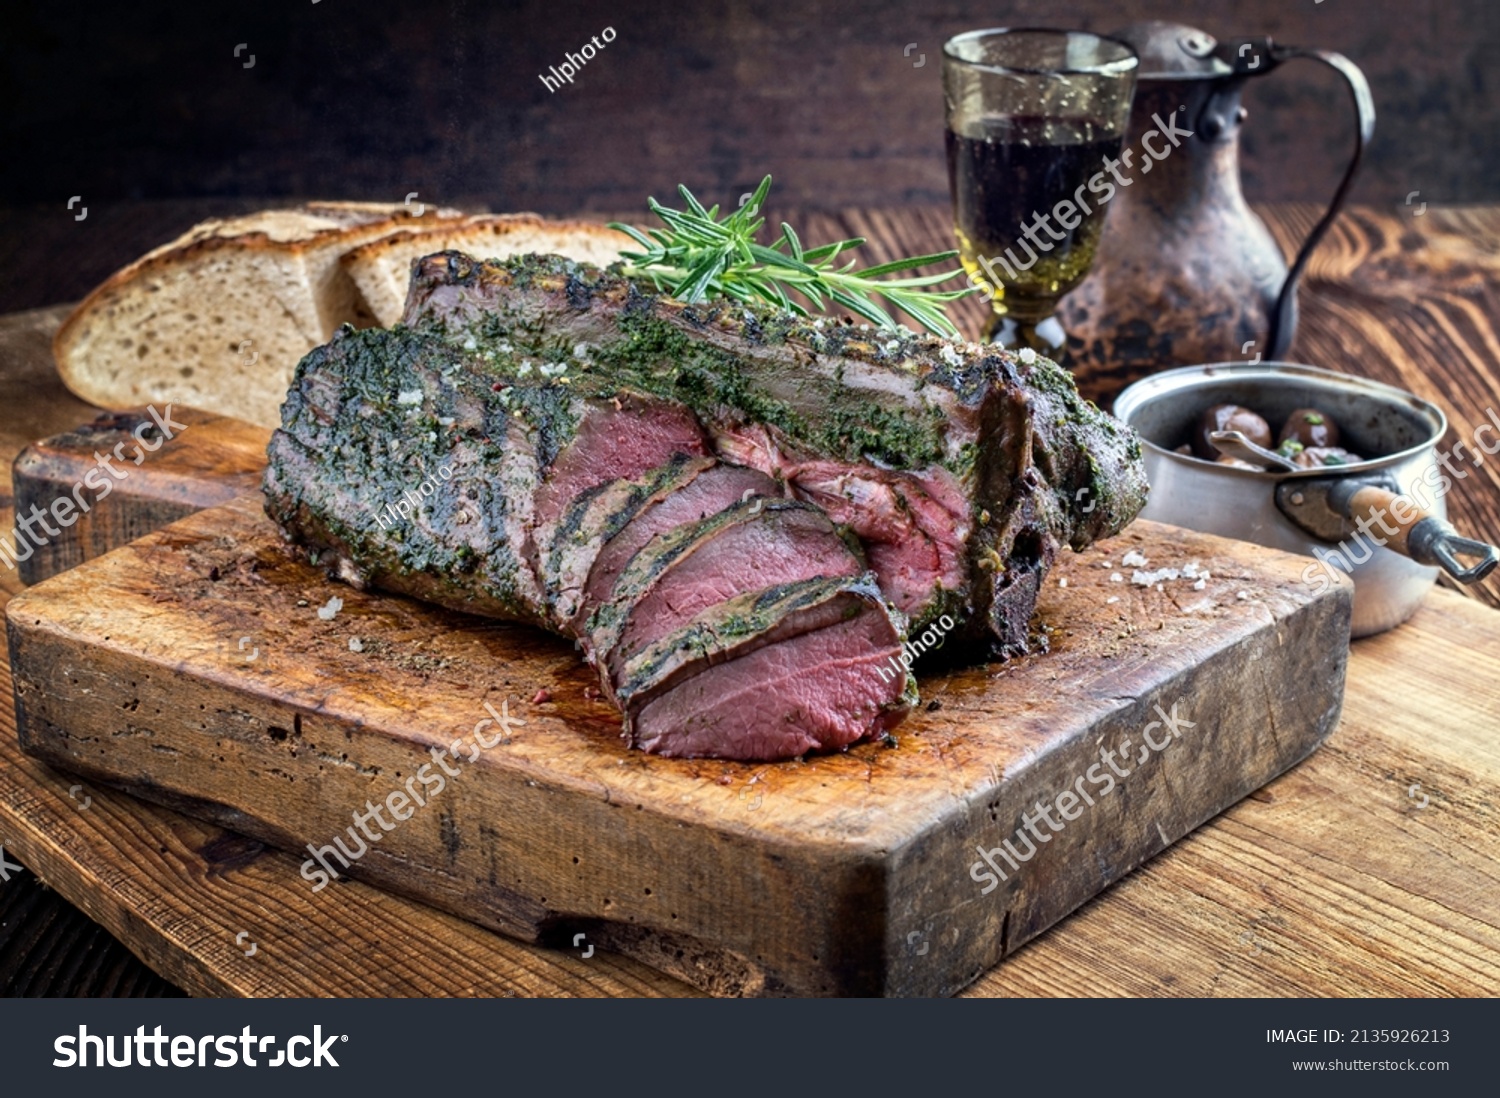 Barbecue Saddle of Venison on Cutting Board #2135926213